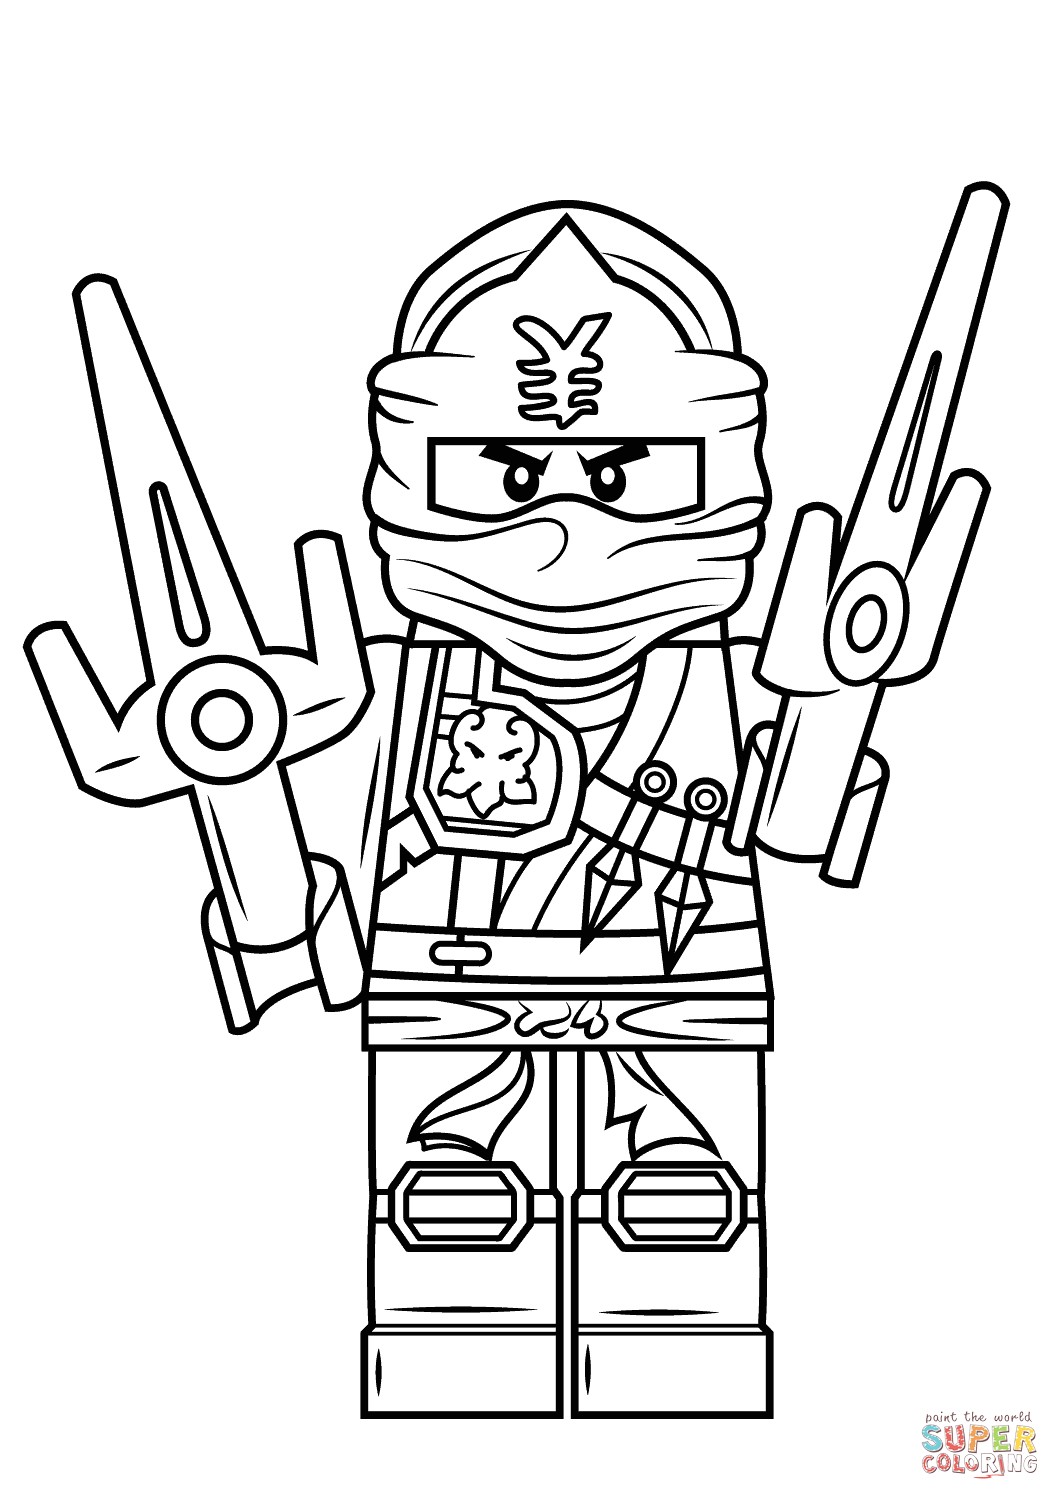 1060x1500 Lego Ninjago Jay ZX coloring page Free Printable Coloring Pages